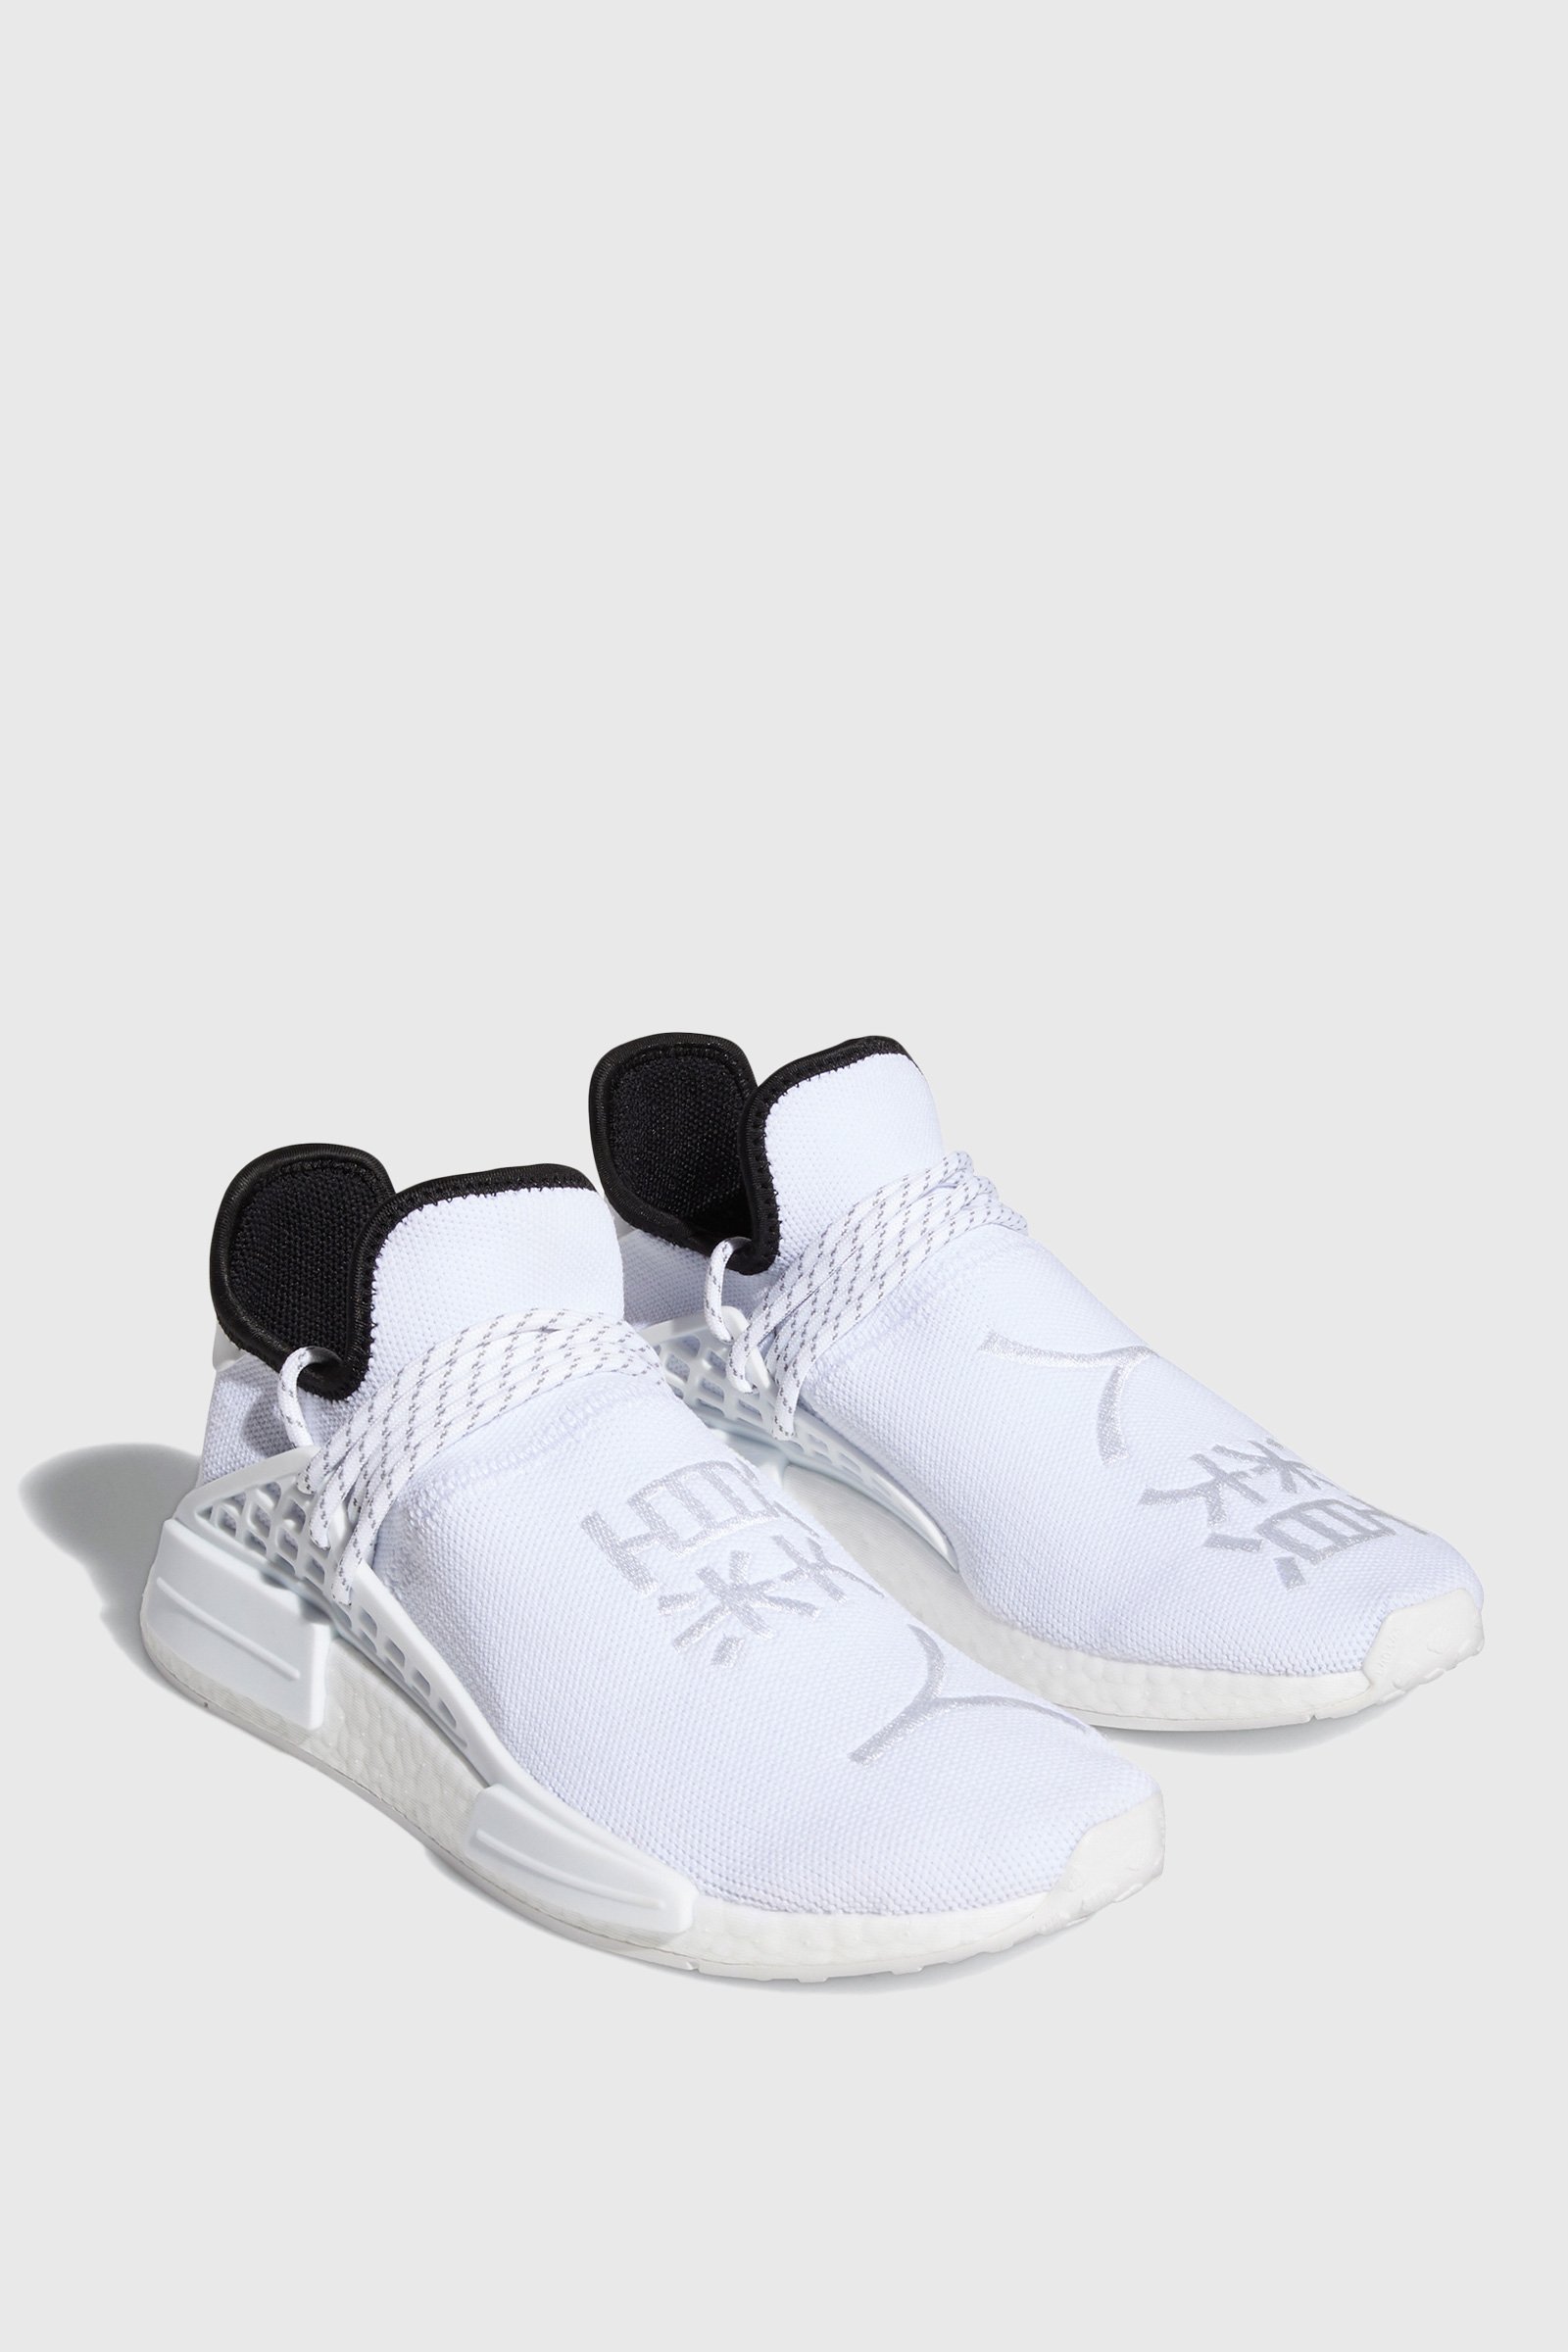 nmd shoe cleaner